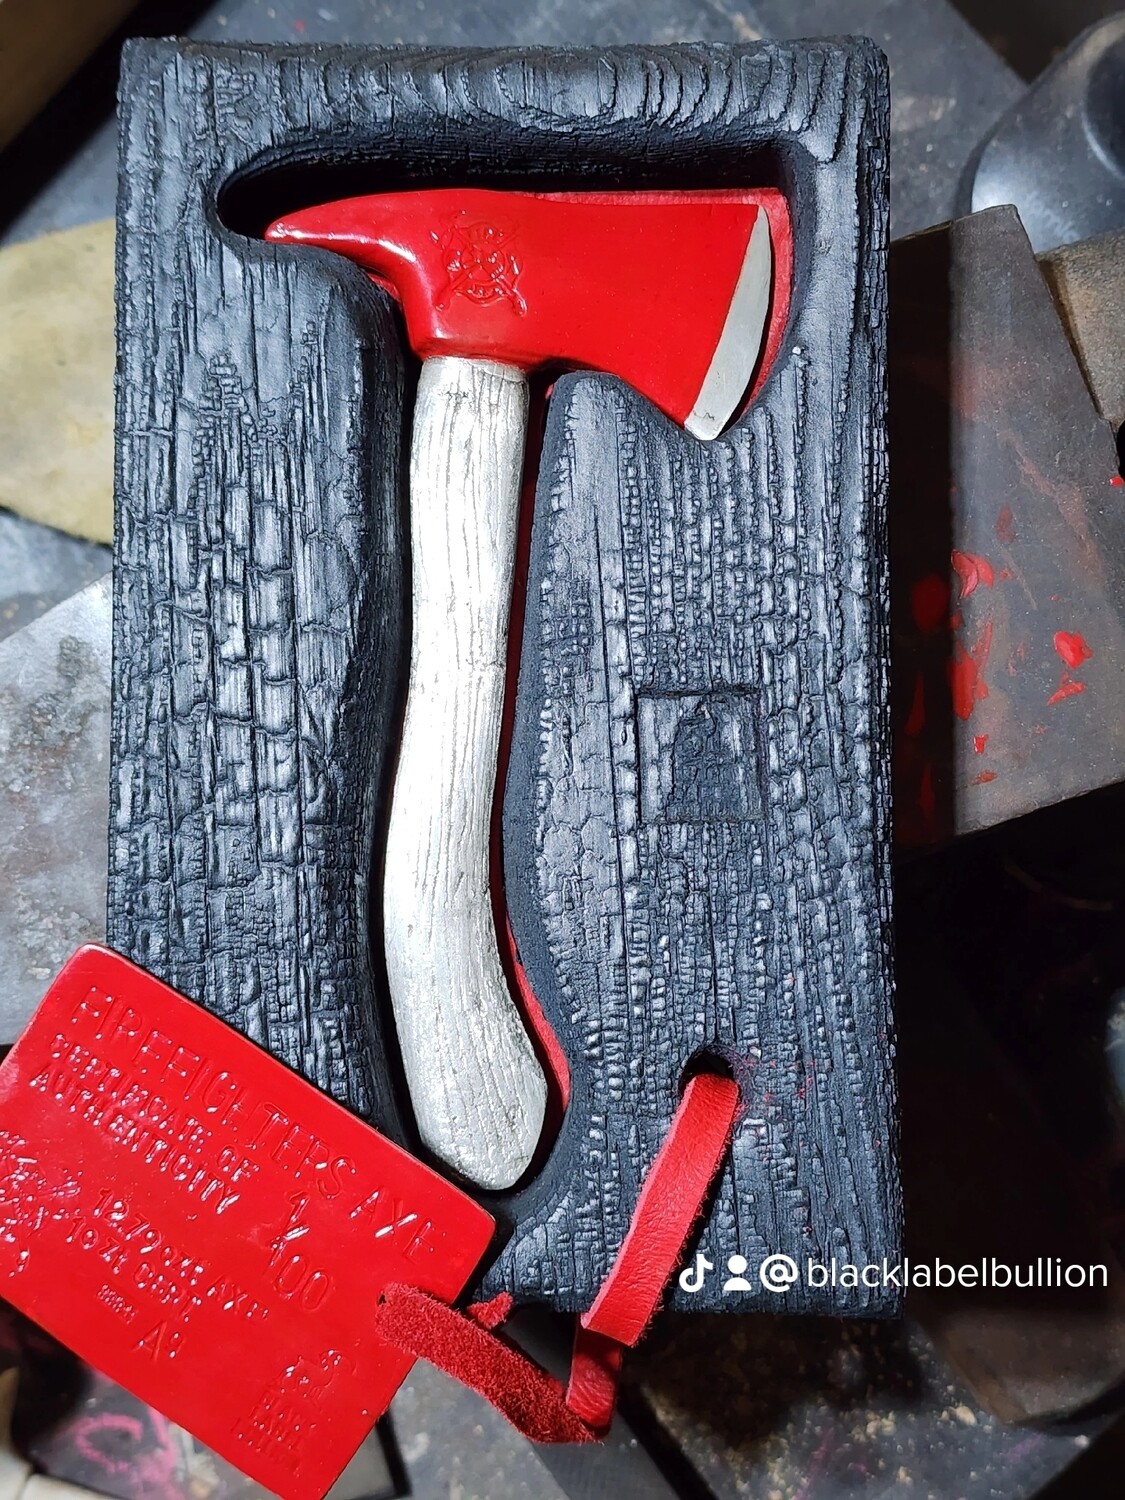 Firefighters Axe